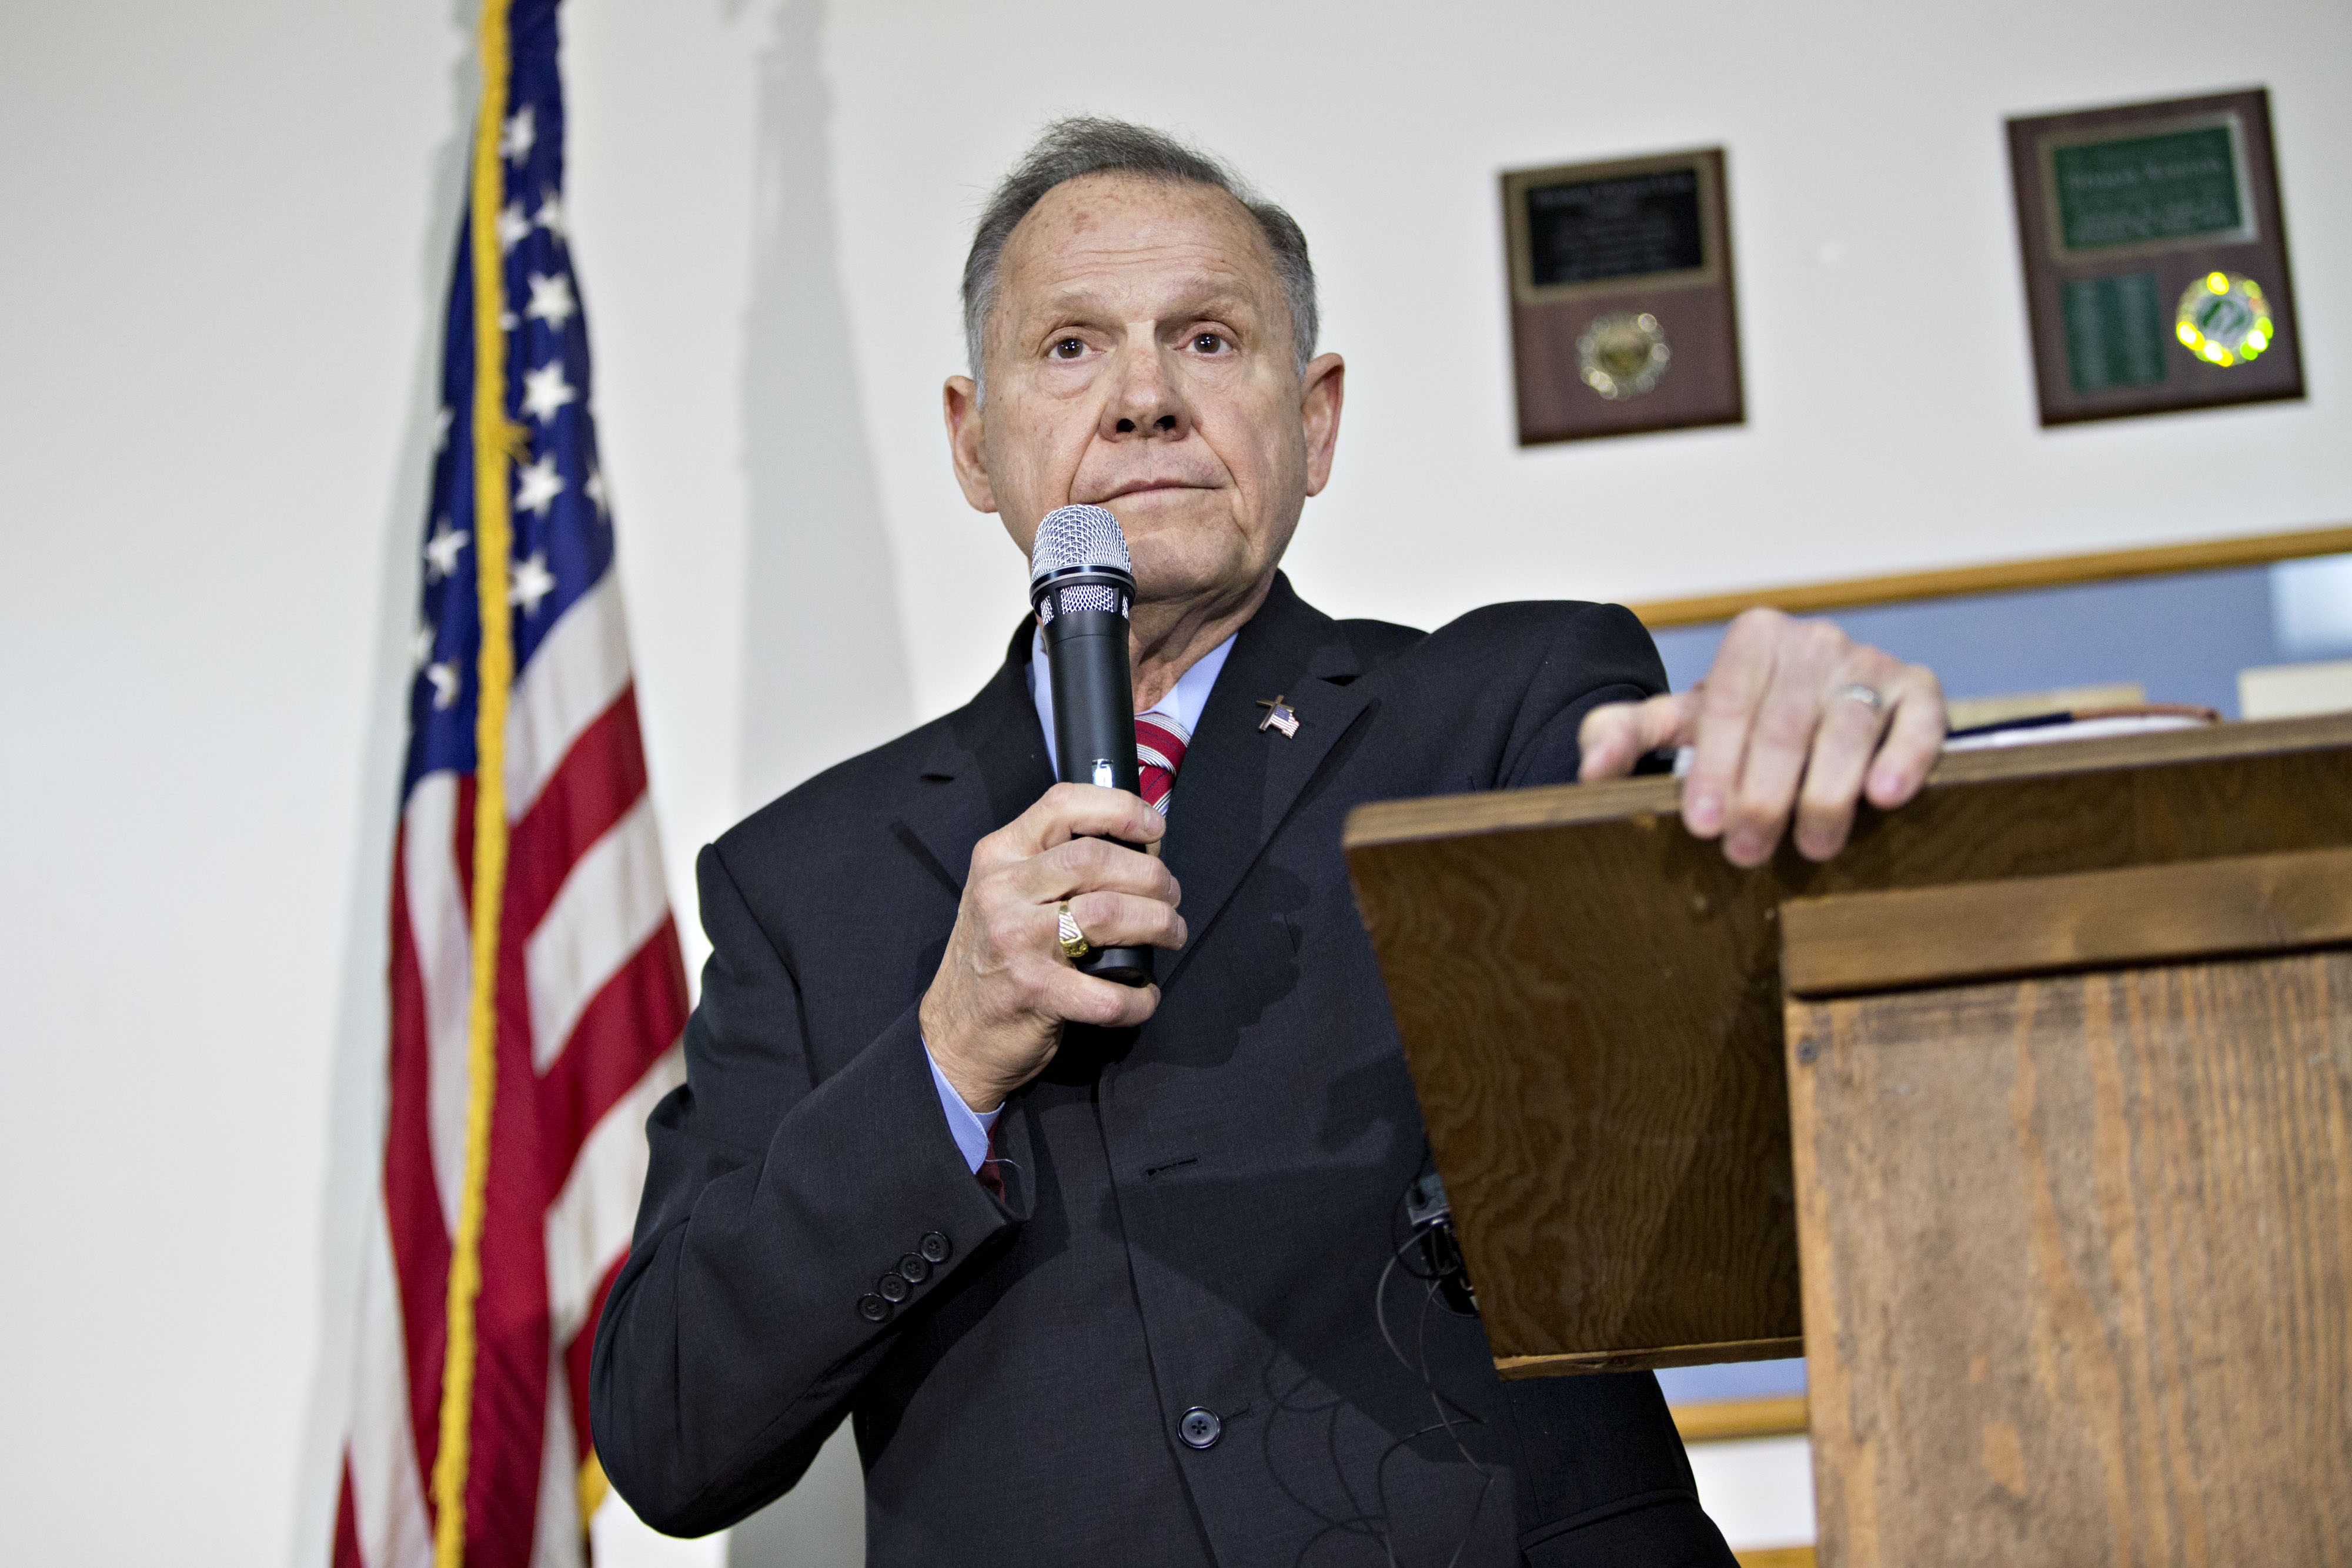 Moore pauses while speaking during a campaign rally in Henagar, Alabama, on Nov. 27.